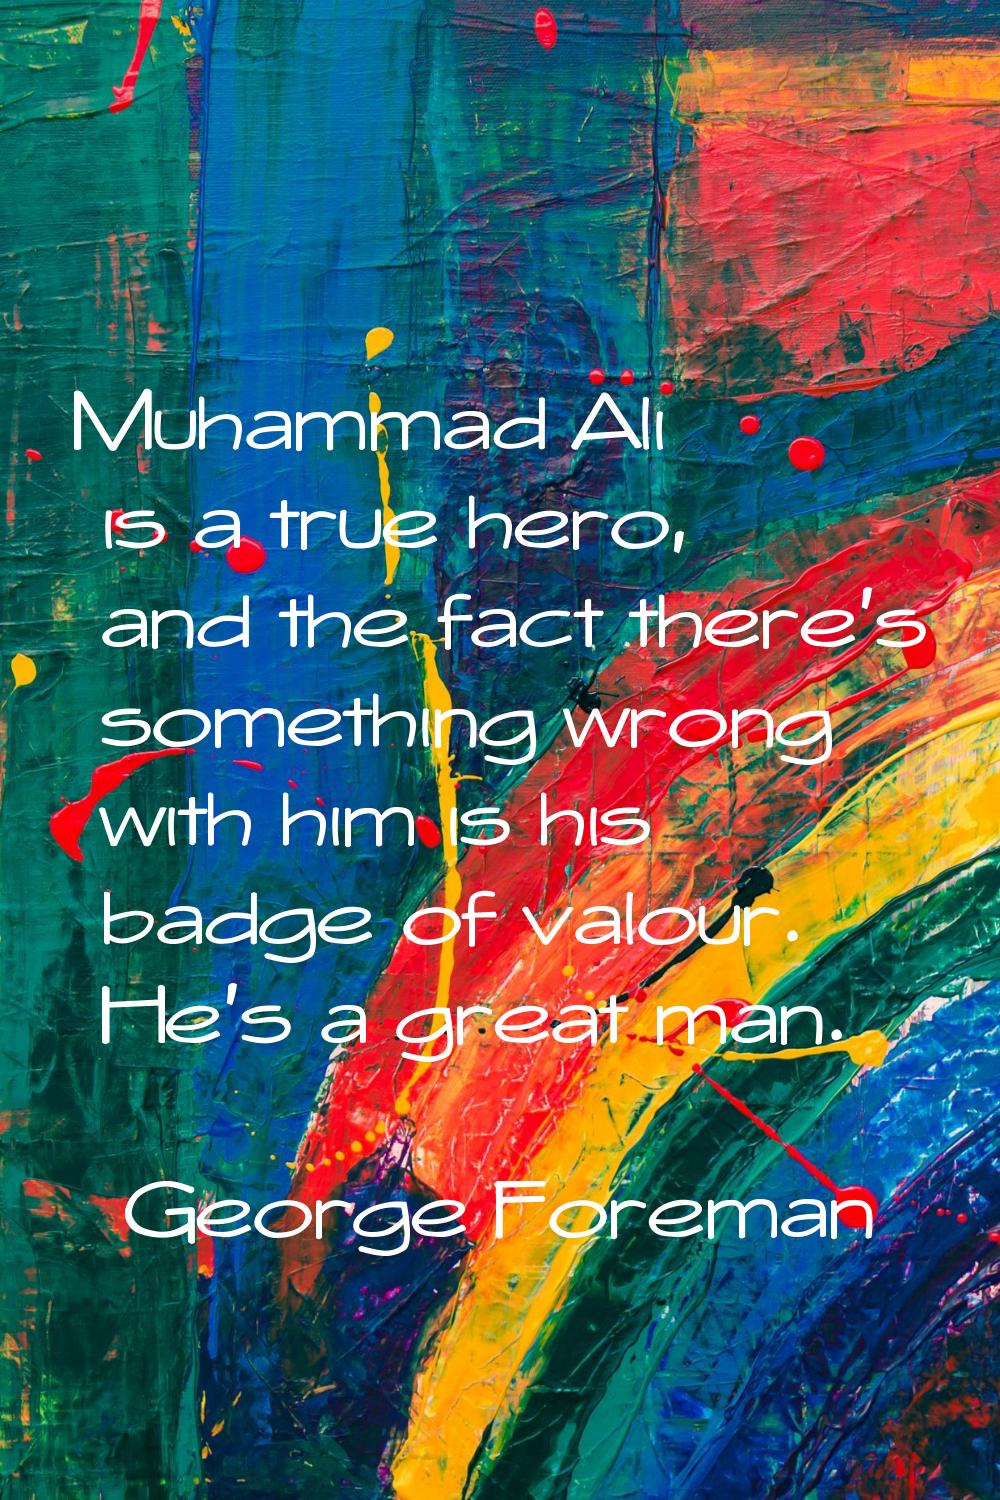 Muhammad Ali is a true hero, and the fact there's something wrong with him is his badge of valour. 